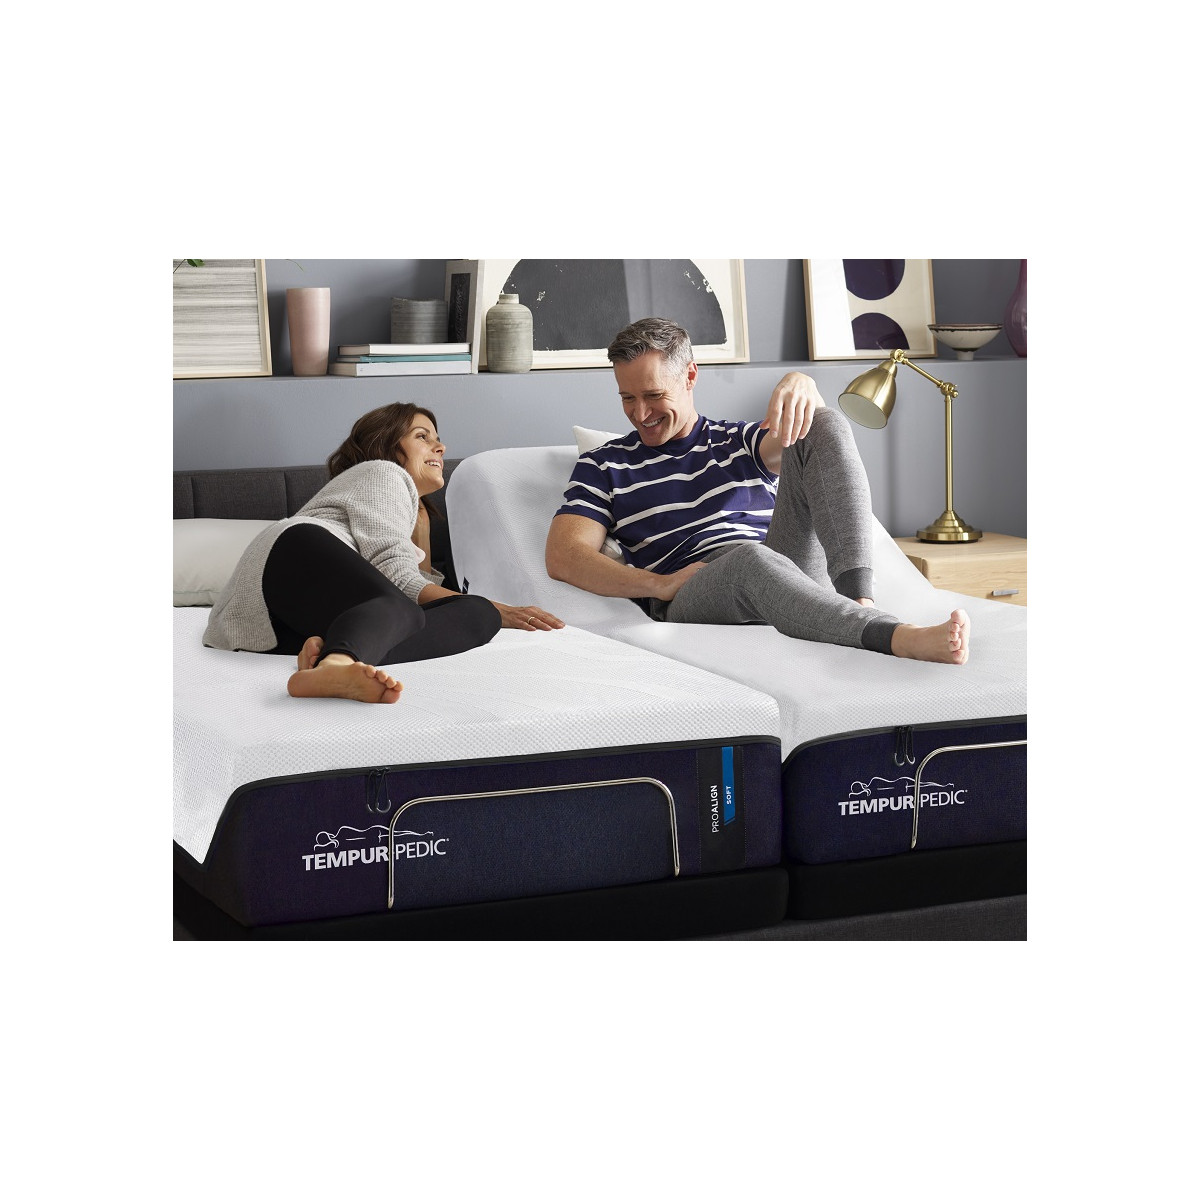 Firm tempur mattress with adjustable base SF 600.